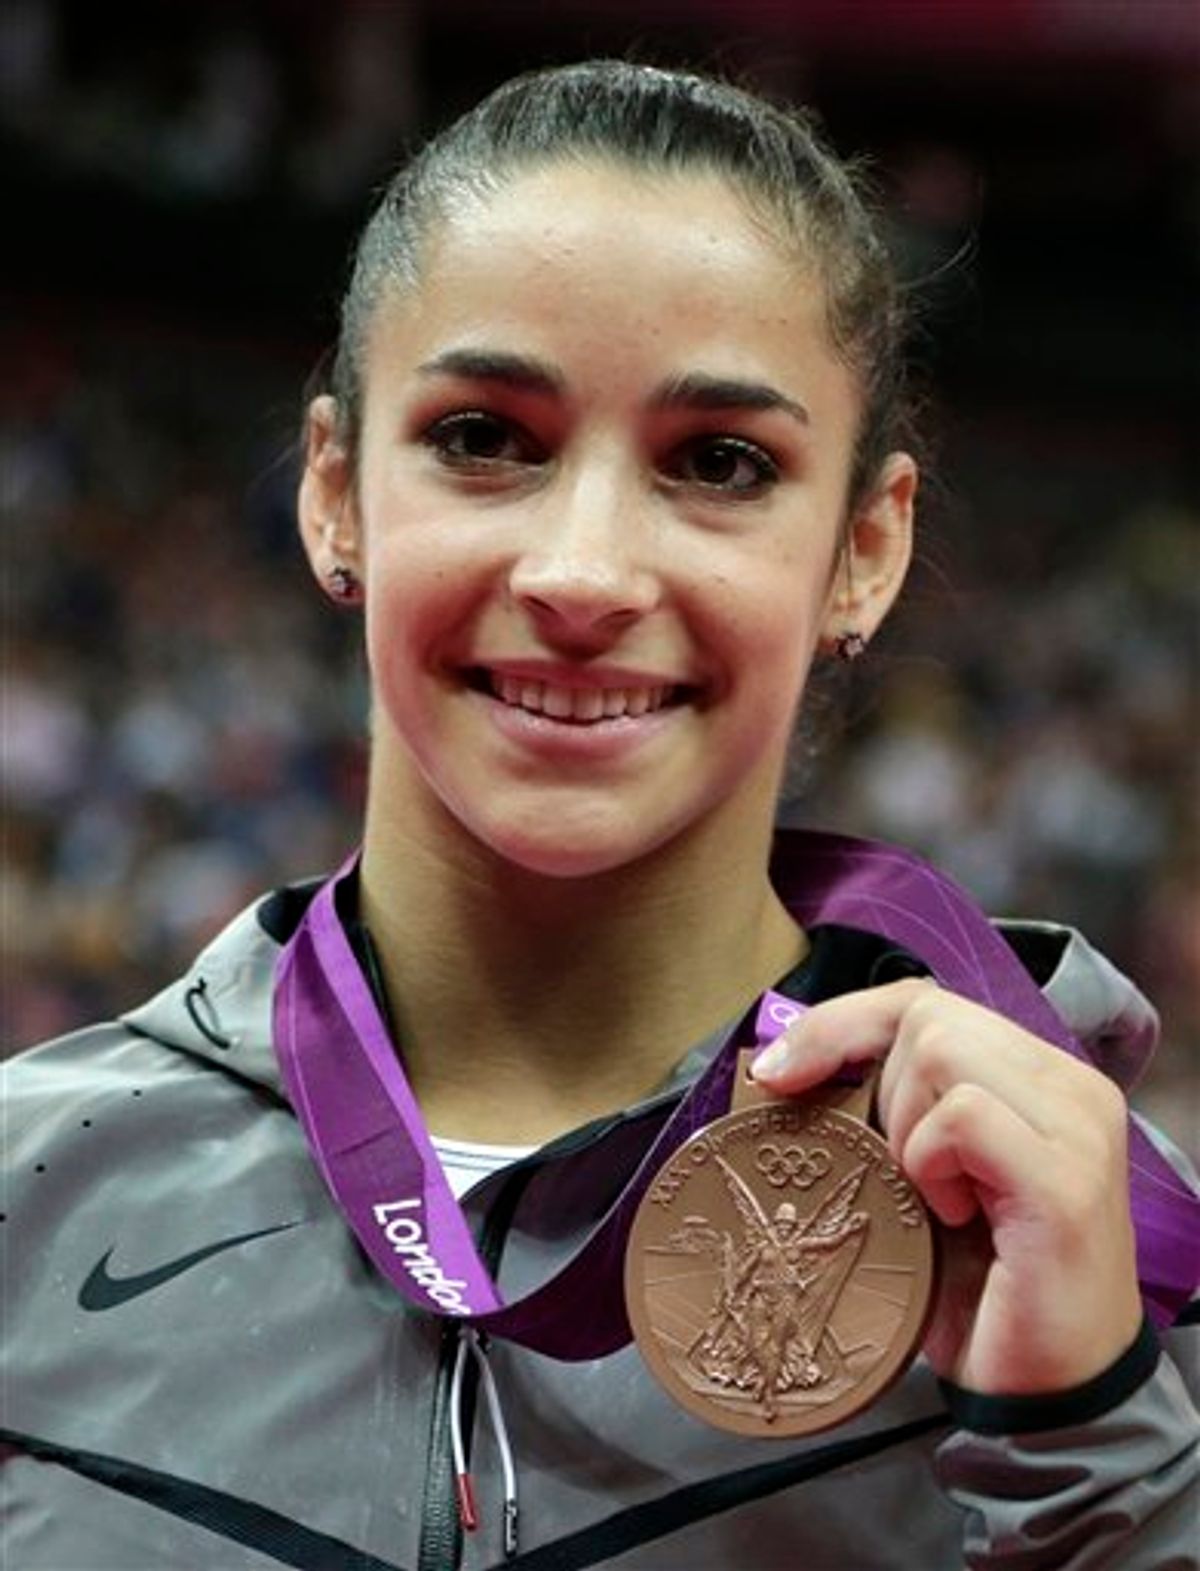 U.S. gymnast Alexandra Raisman displays her bronze medal for the balance beam during the artistic gymnastics women's apparatus finals at the 2012 Summer Olympics, Tuesday, Aug. 7, 2012, in London. (AP Photo/Gregory Bull)    (AP)